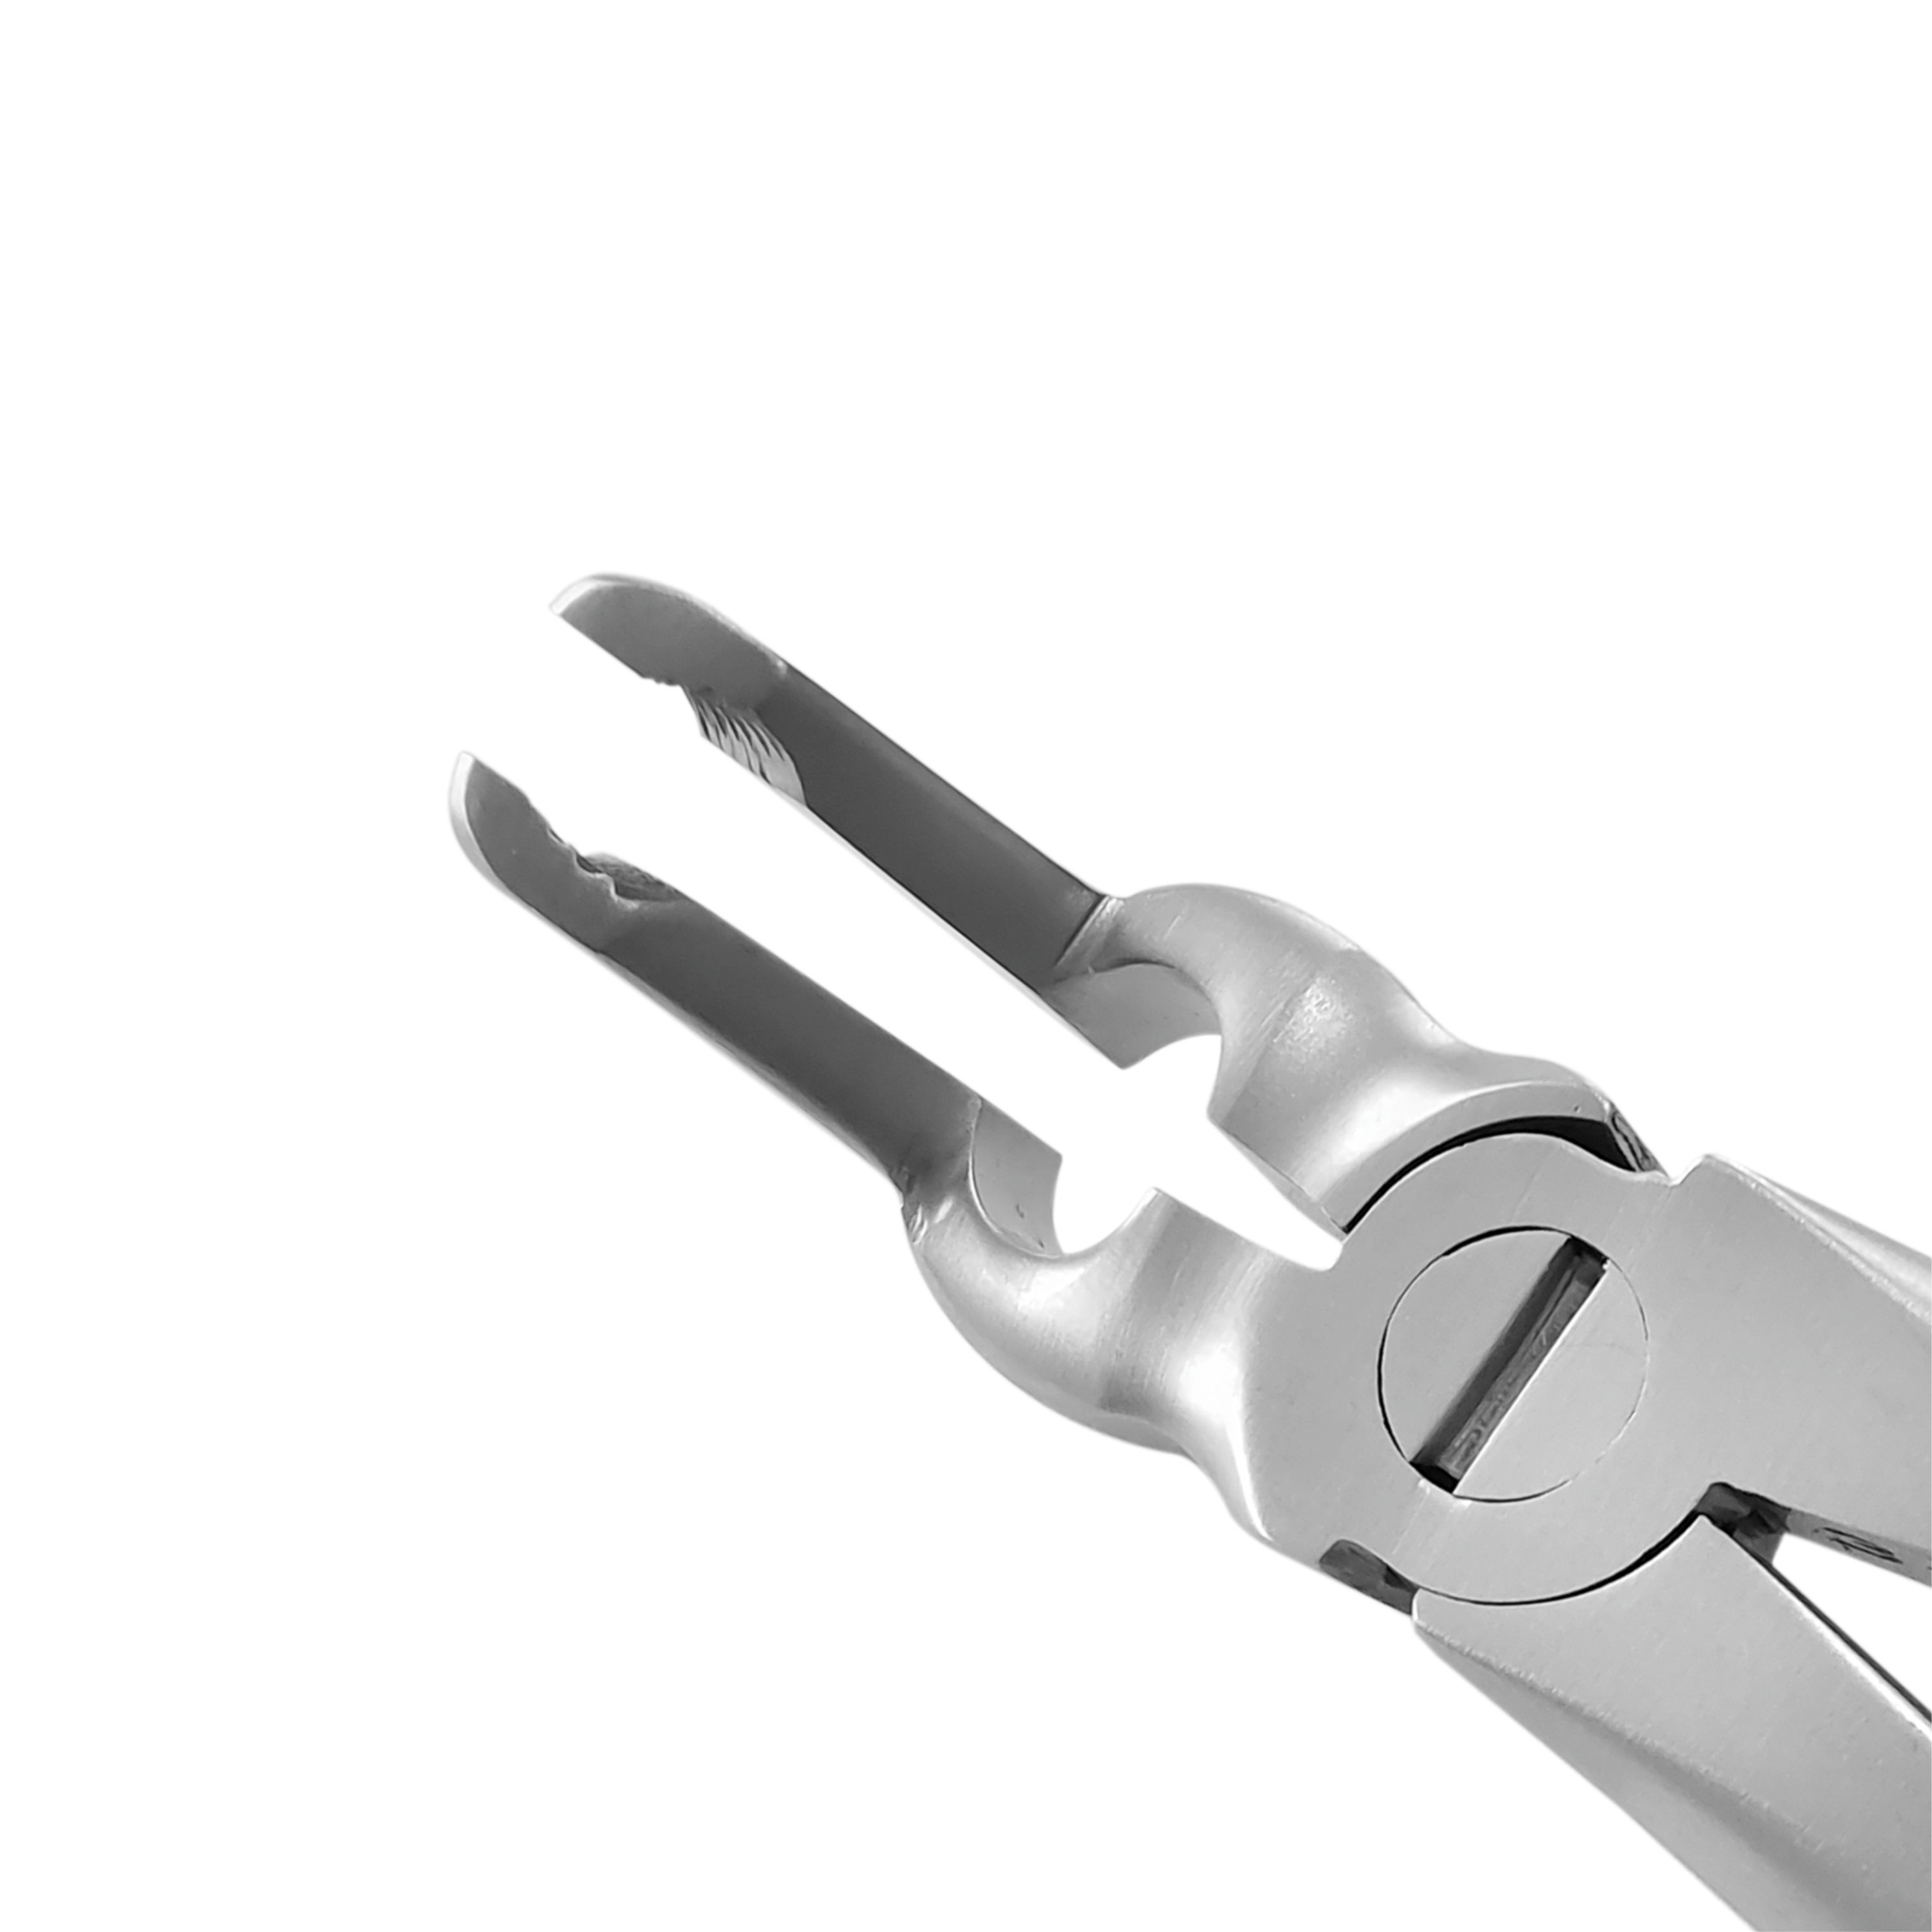 Trust & Care Dr. Comella Extraction Forcep